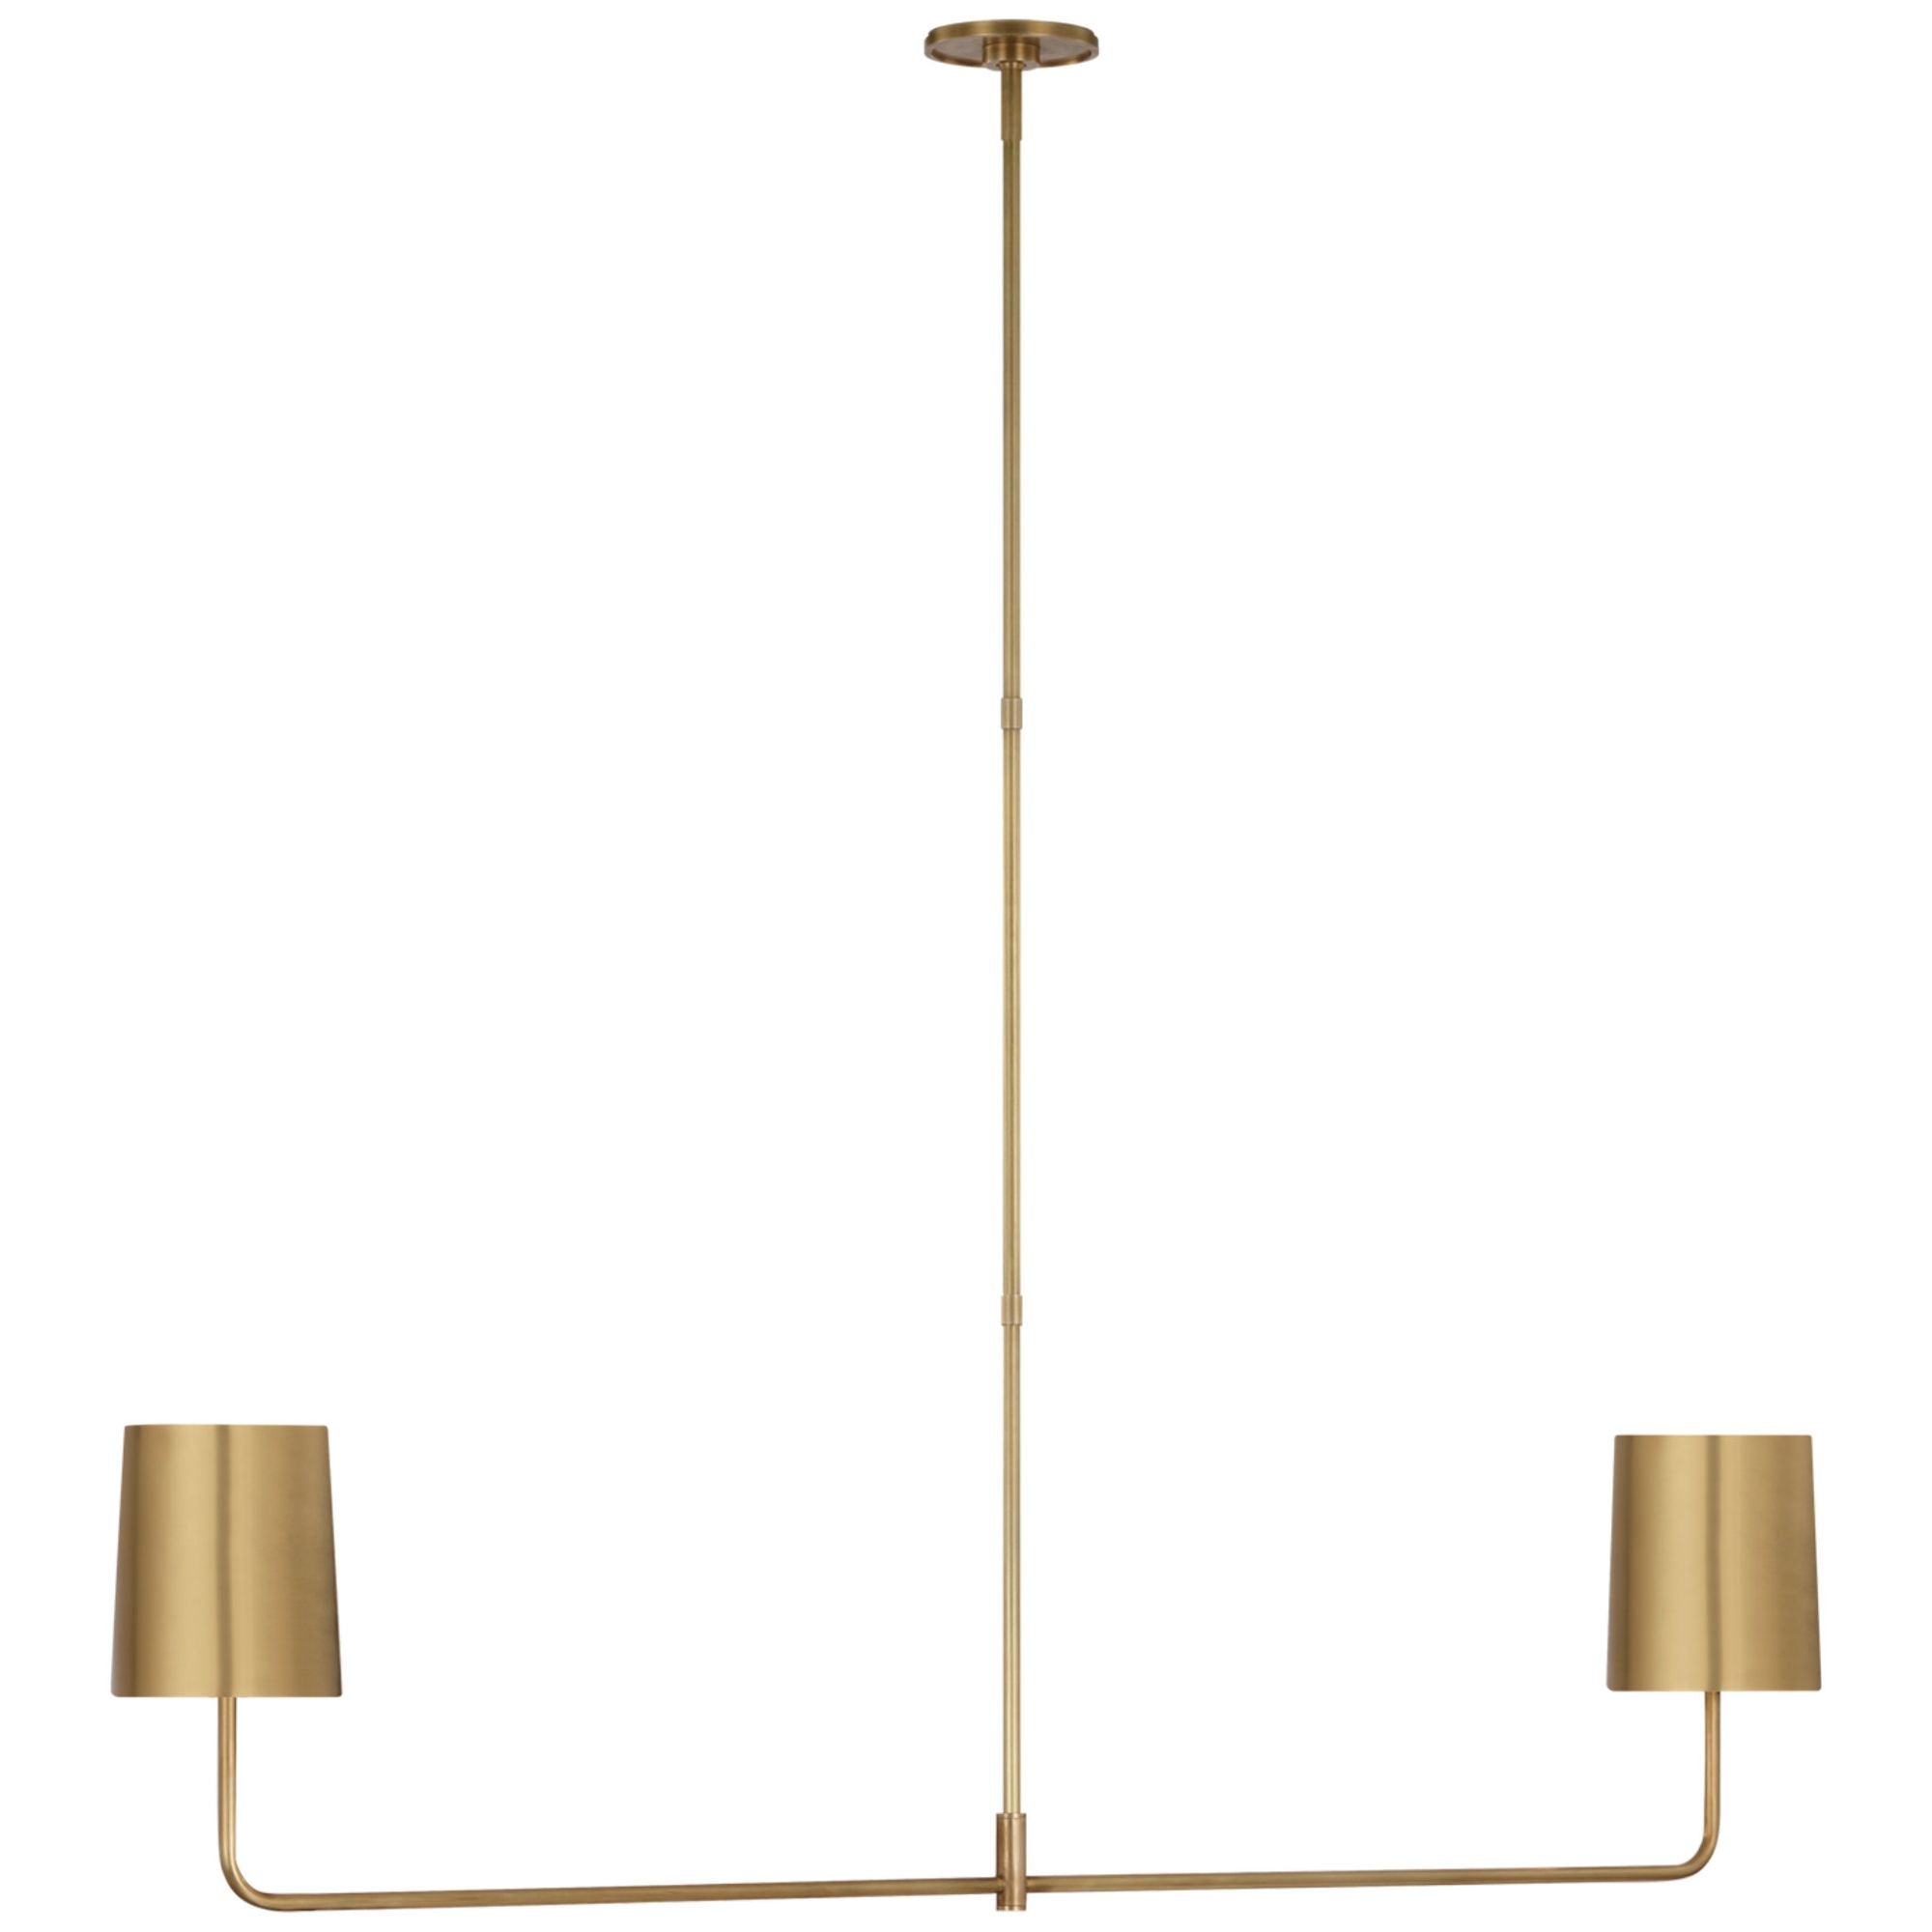 Barbara Barry Go Lightly 54" Two Light Linear Chandelier in Soft Brass with Soft Brass Shades